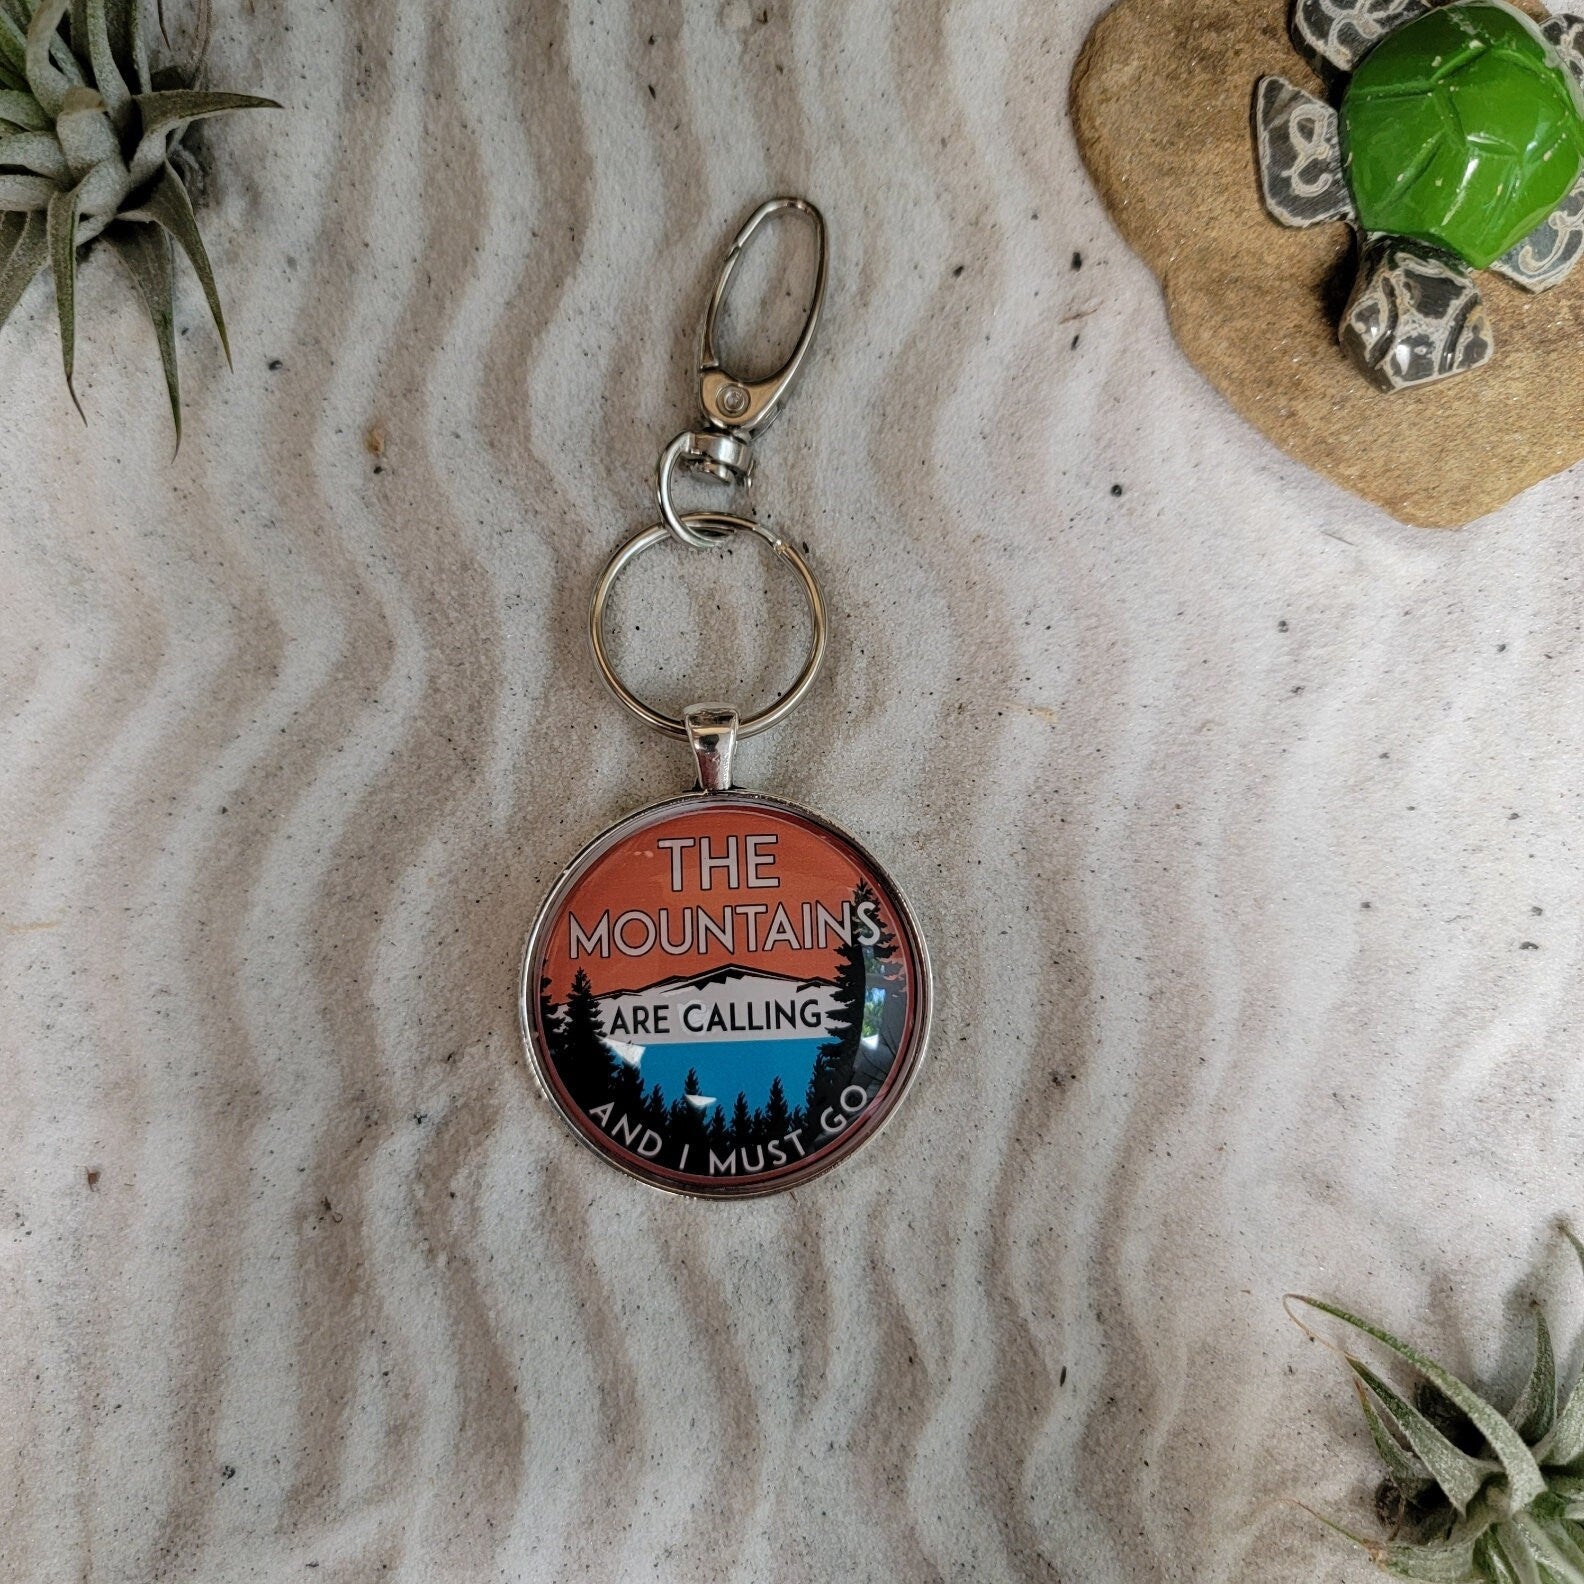 The Mountains Are Calling 1.5" Key Chain And I Must Go Metal Decal National Park Forest